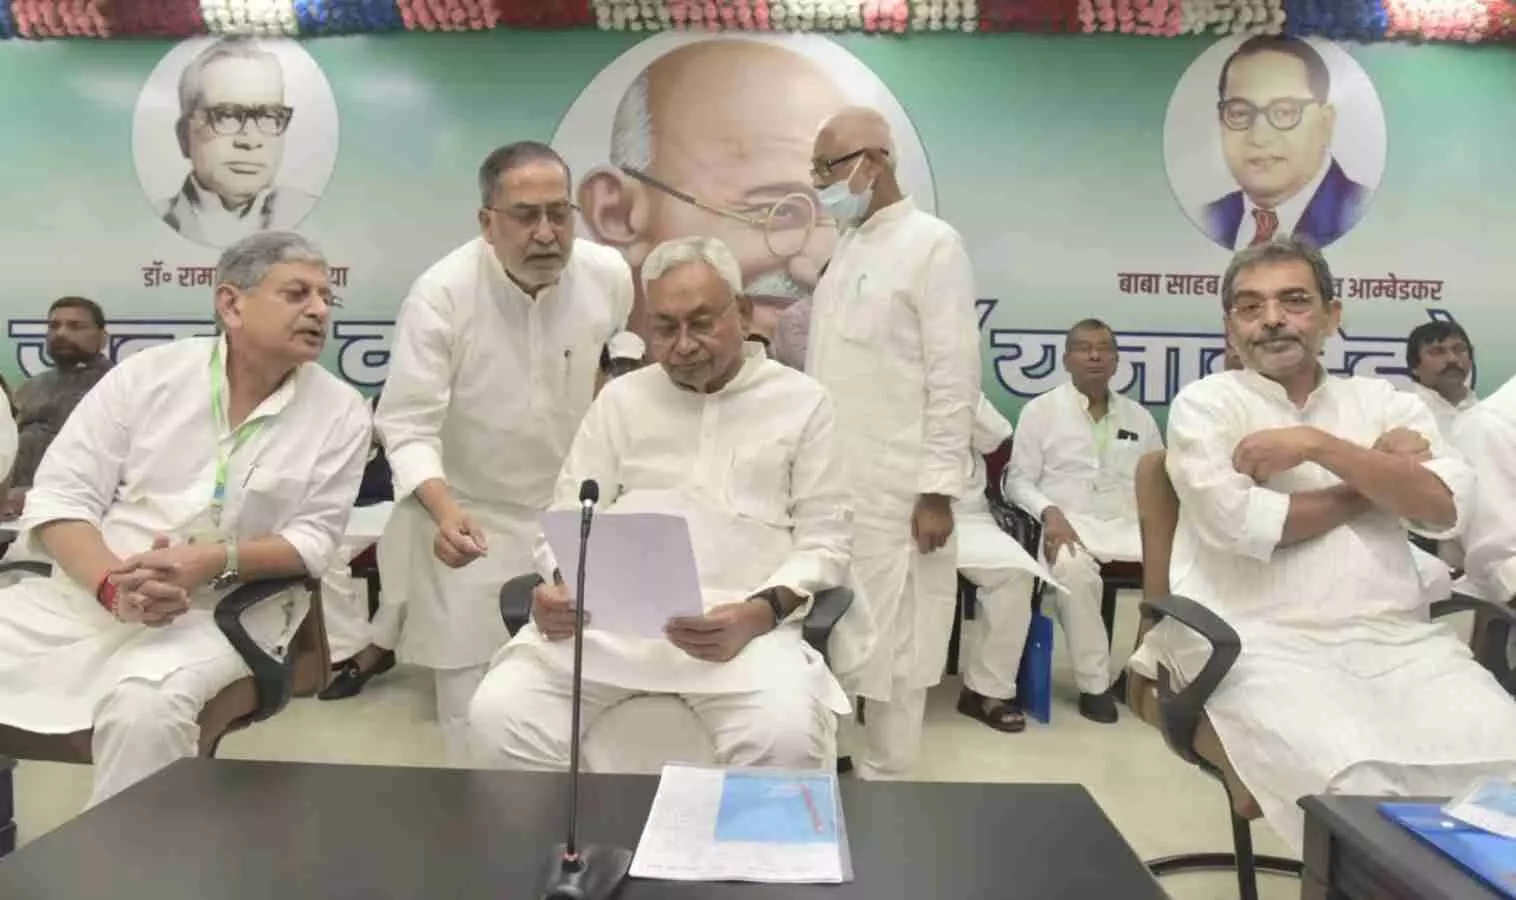 jdu national executive meeting party said one goal remove bjp in 2024